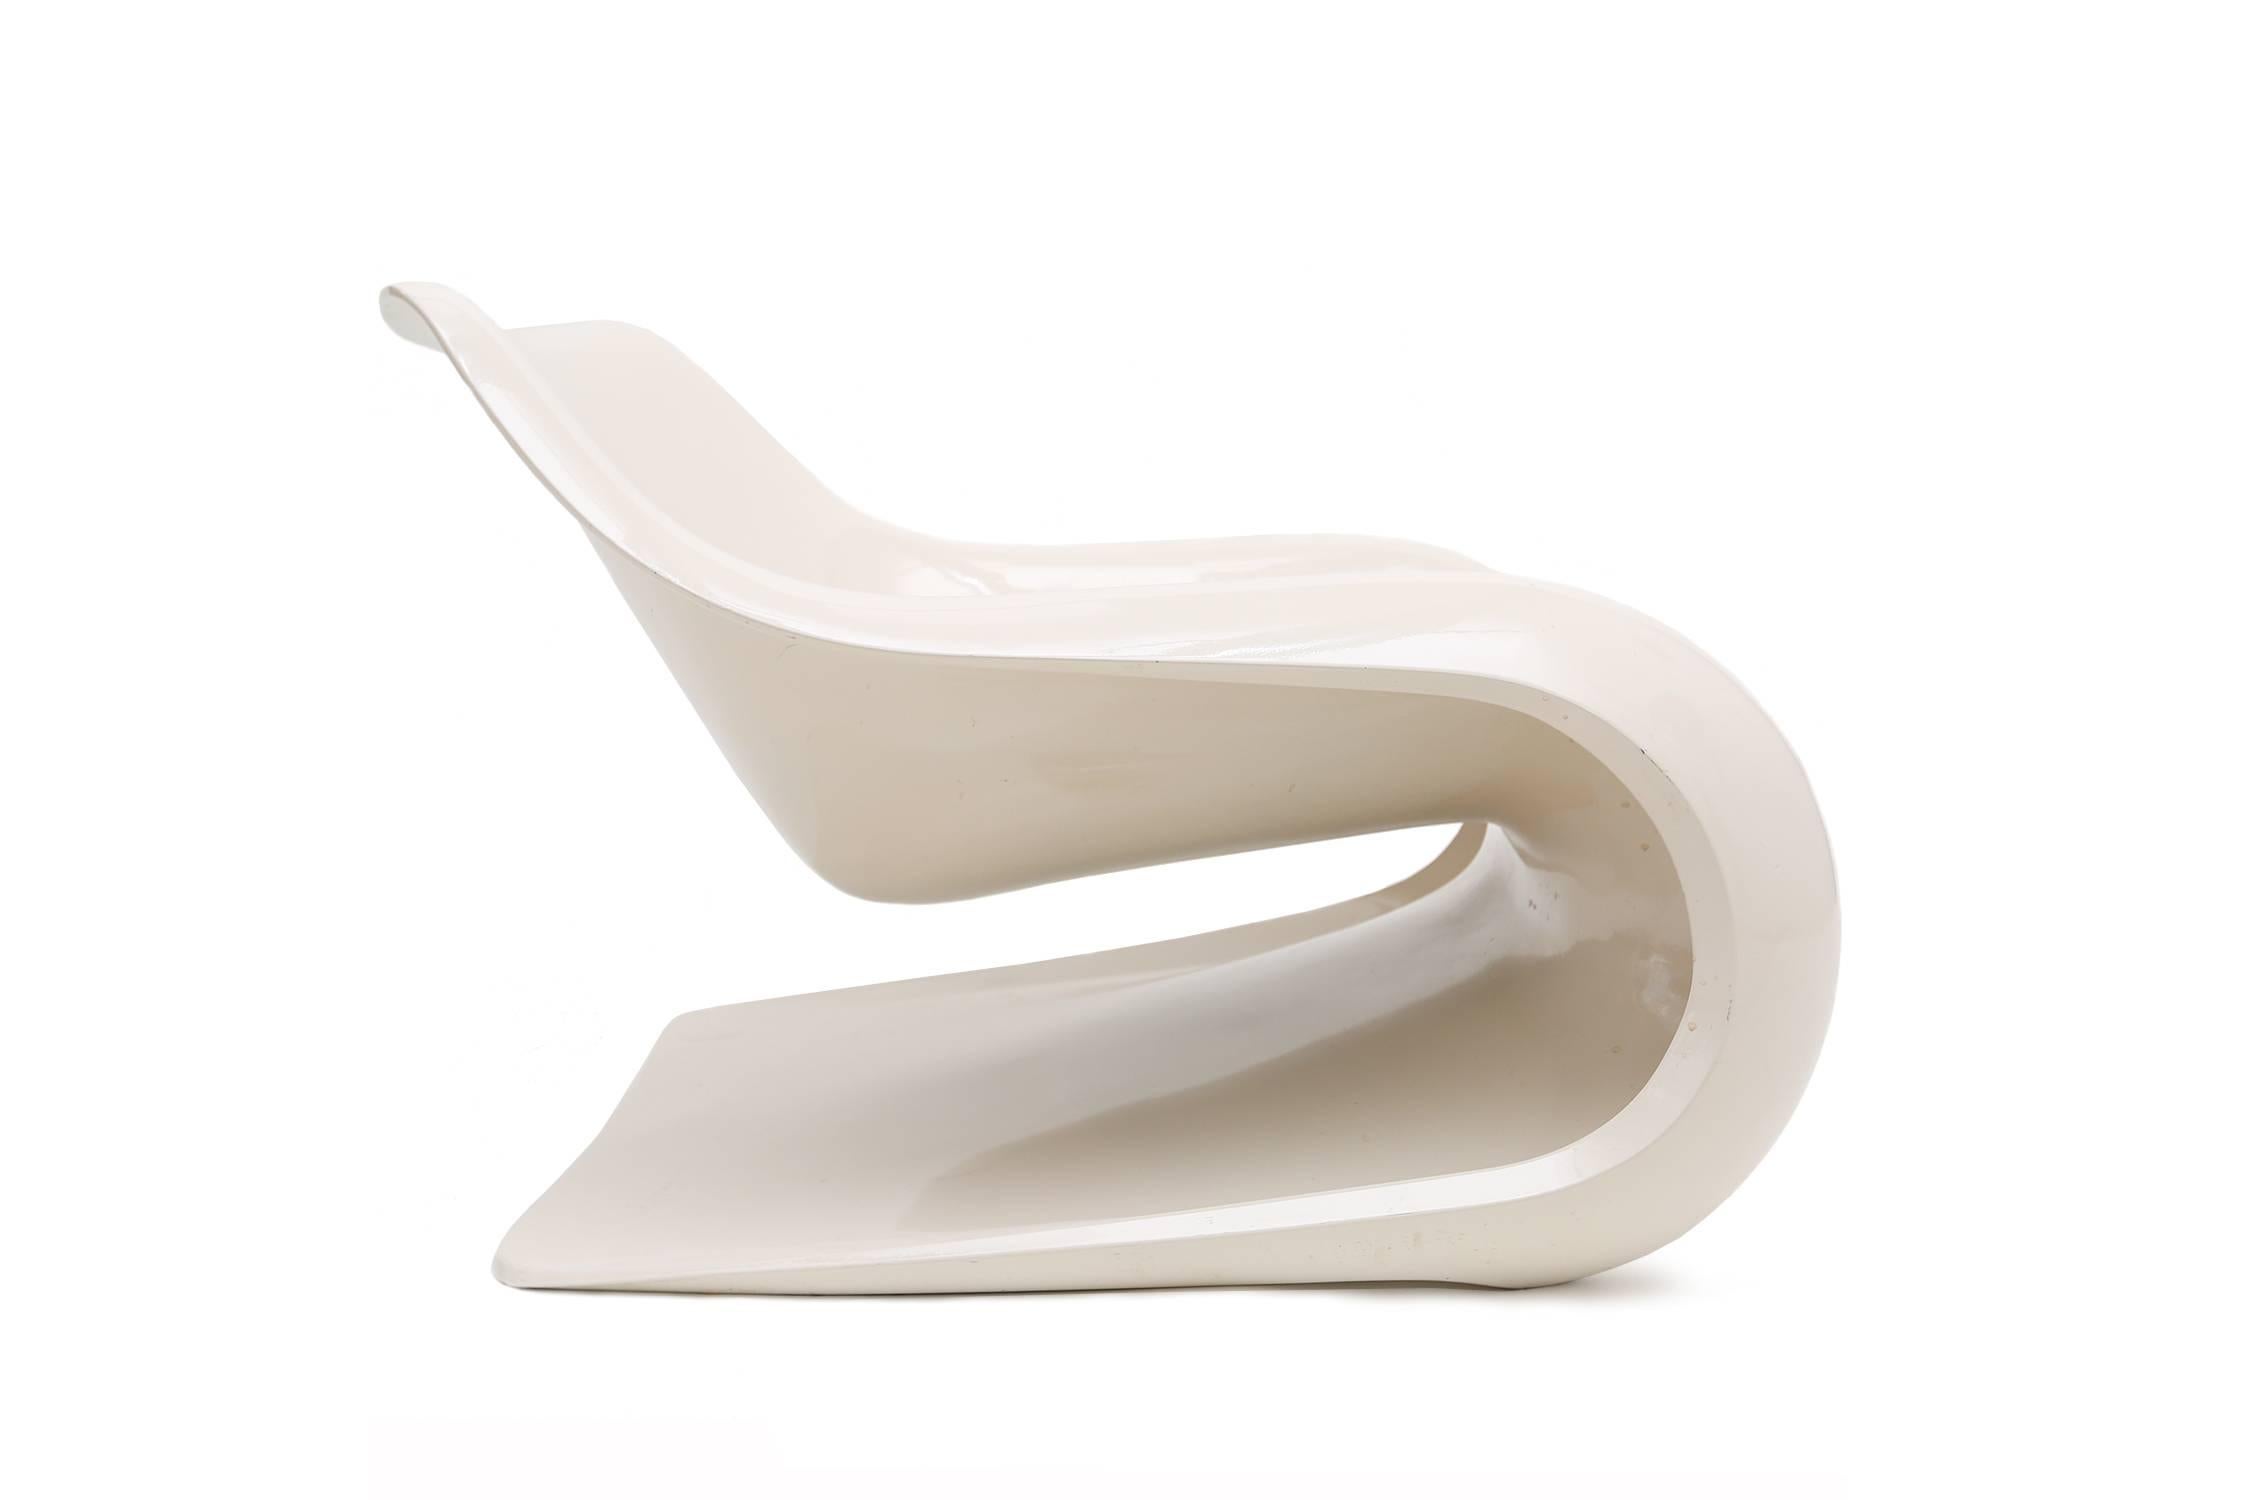 German Targa Lounge Chair by Klaus Uredat for Horn Collection, 1971